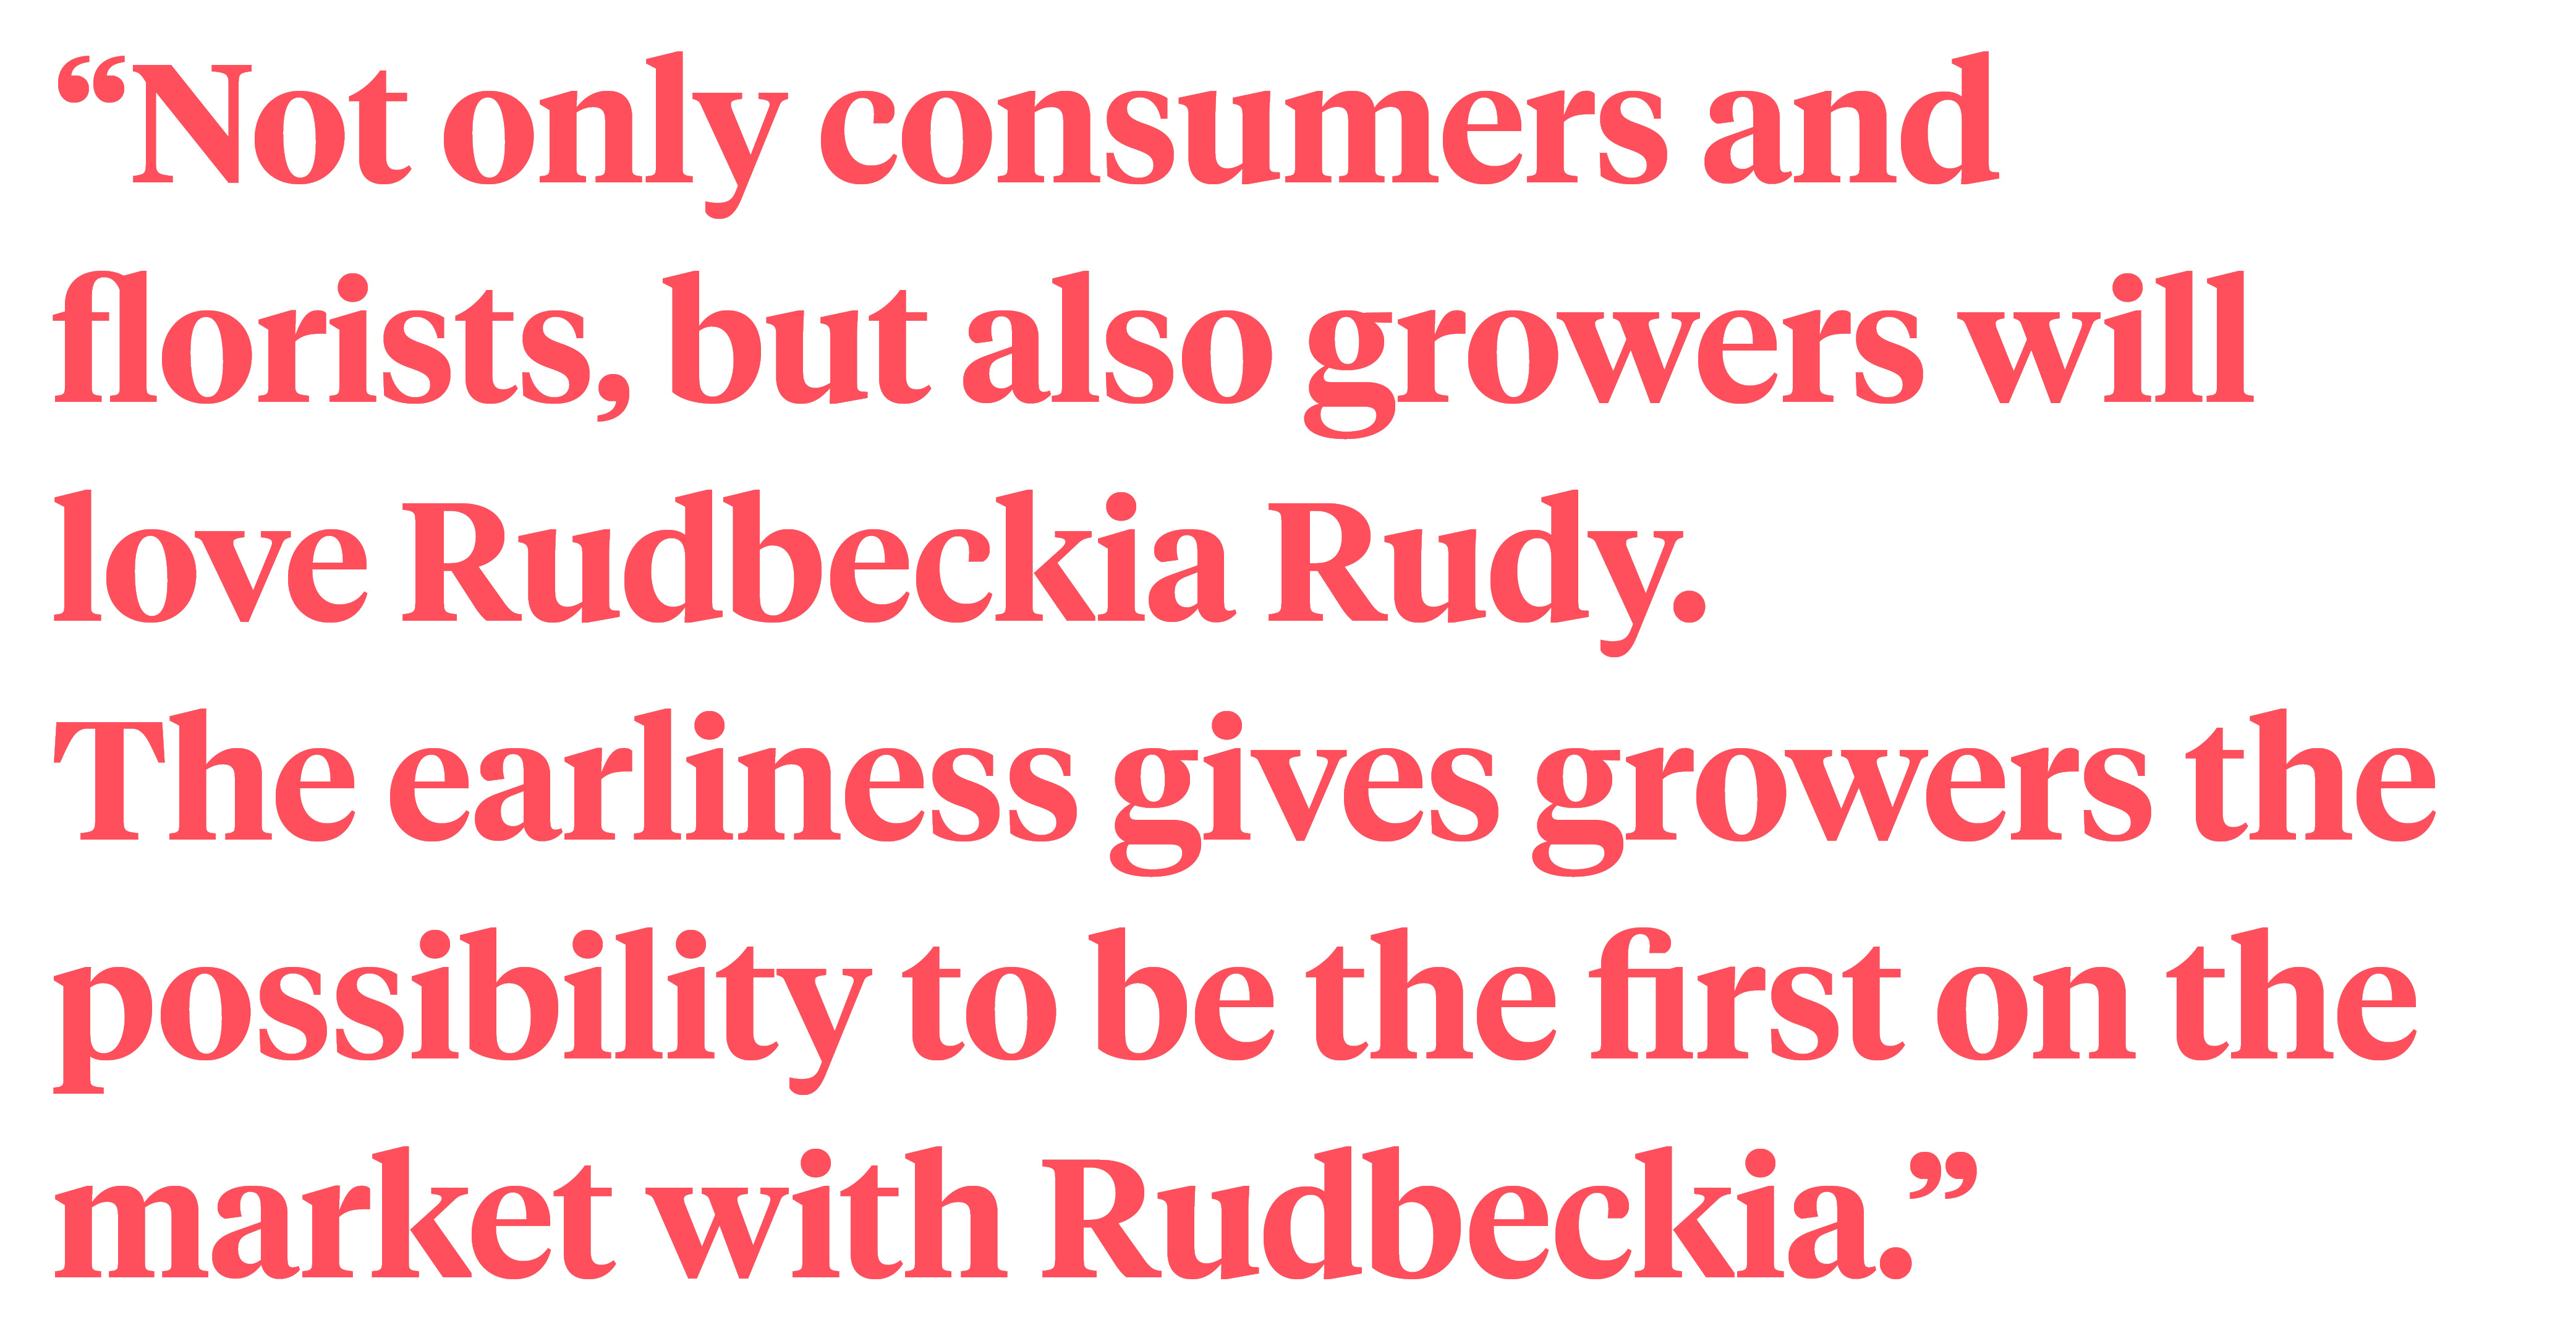 Rudbeckia Rudy by Florensis quote on Thursd